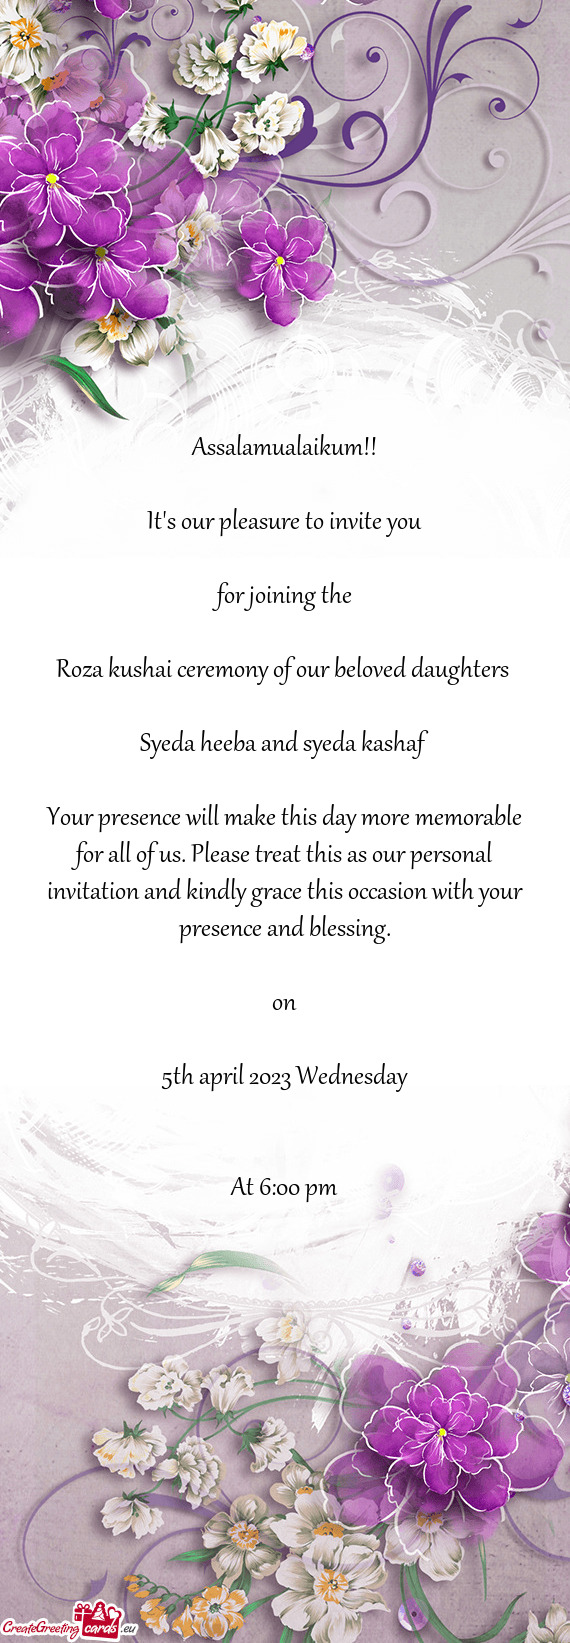 Roza kushai ceremony of our beloved daughters